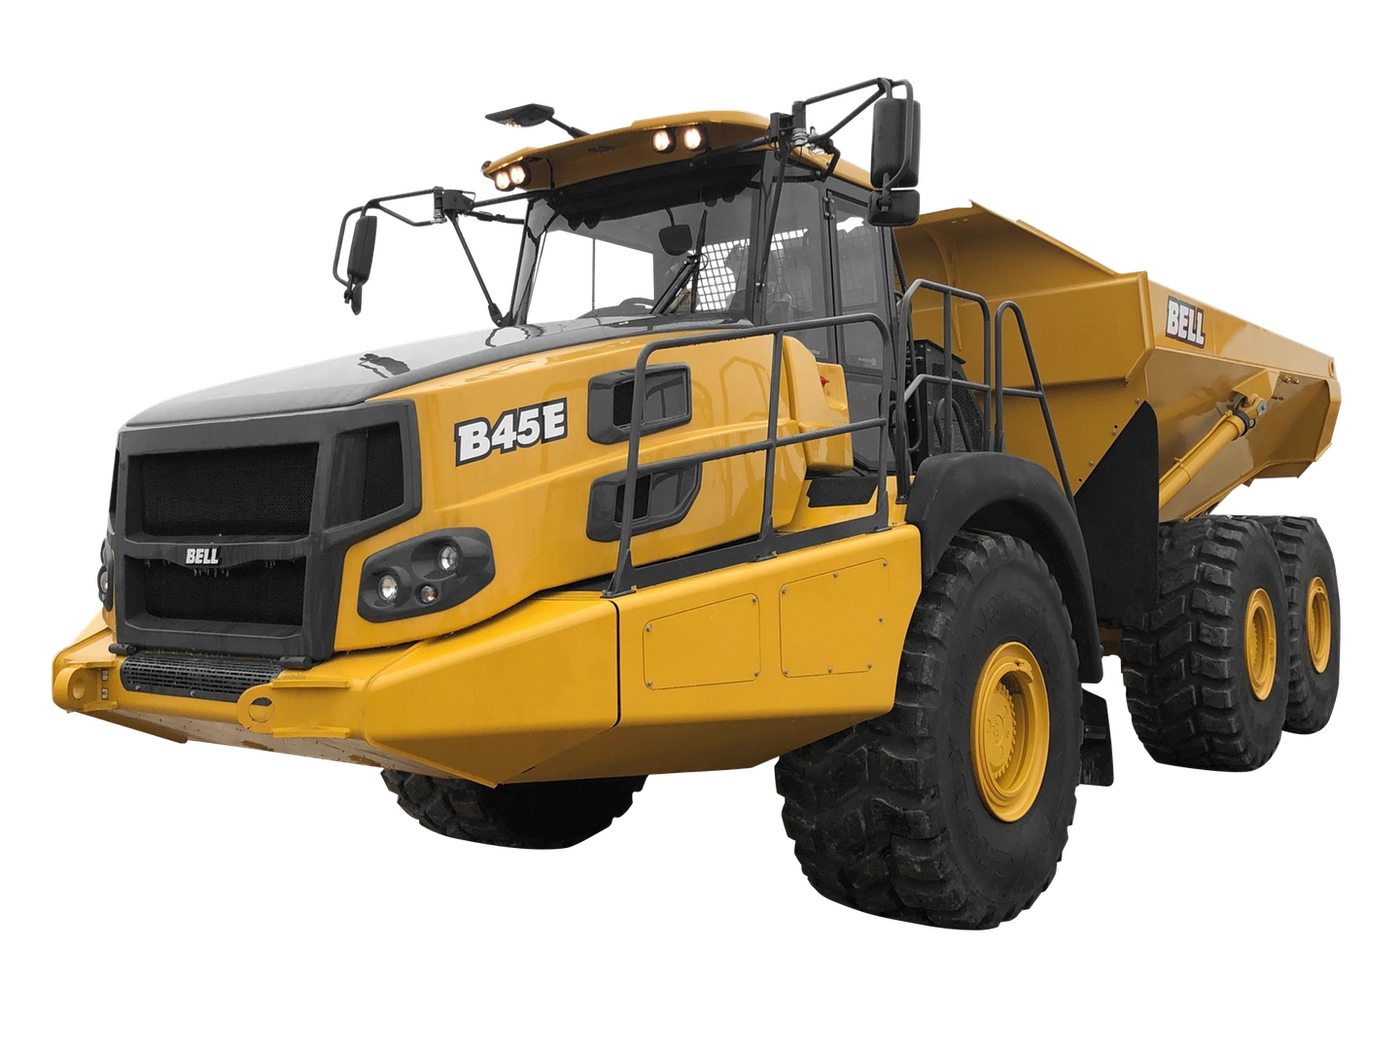 bell-b45e-articulated-dump-truck-available-for-sale-or-rental